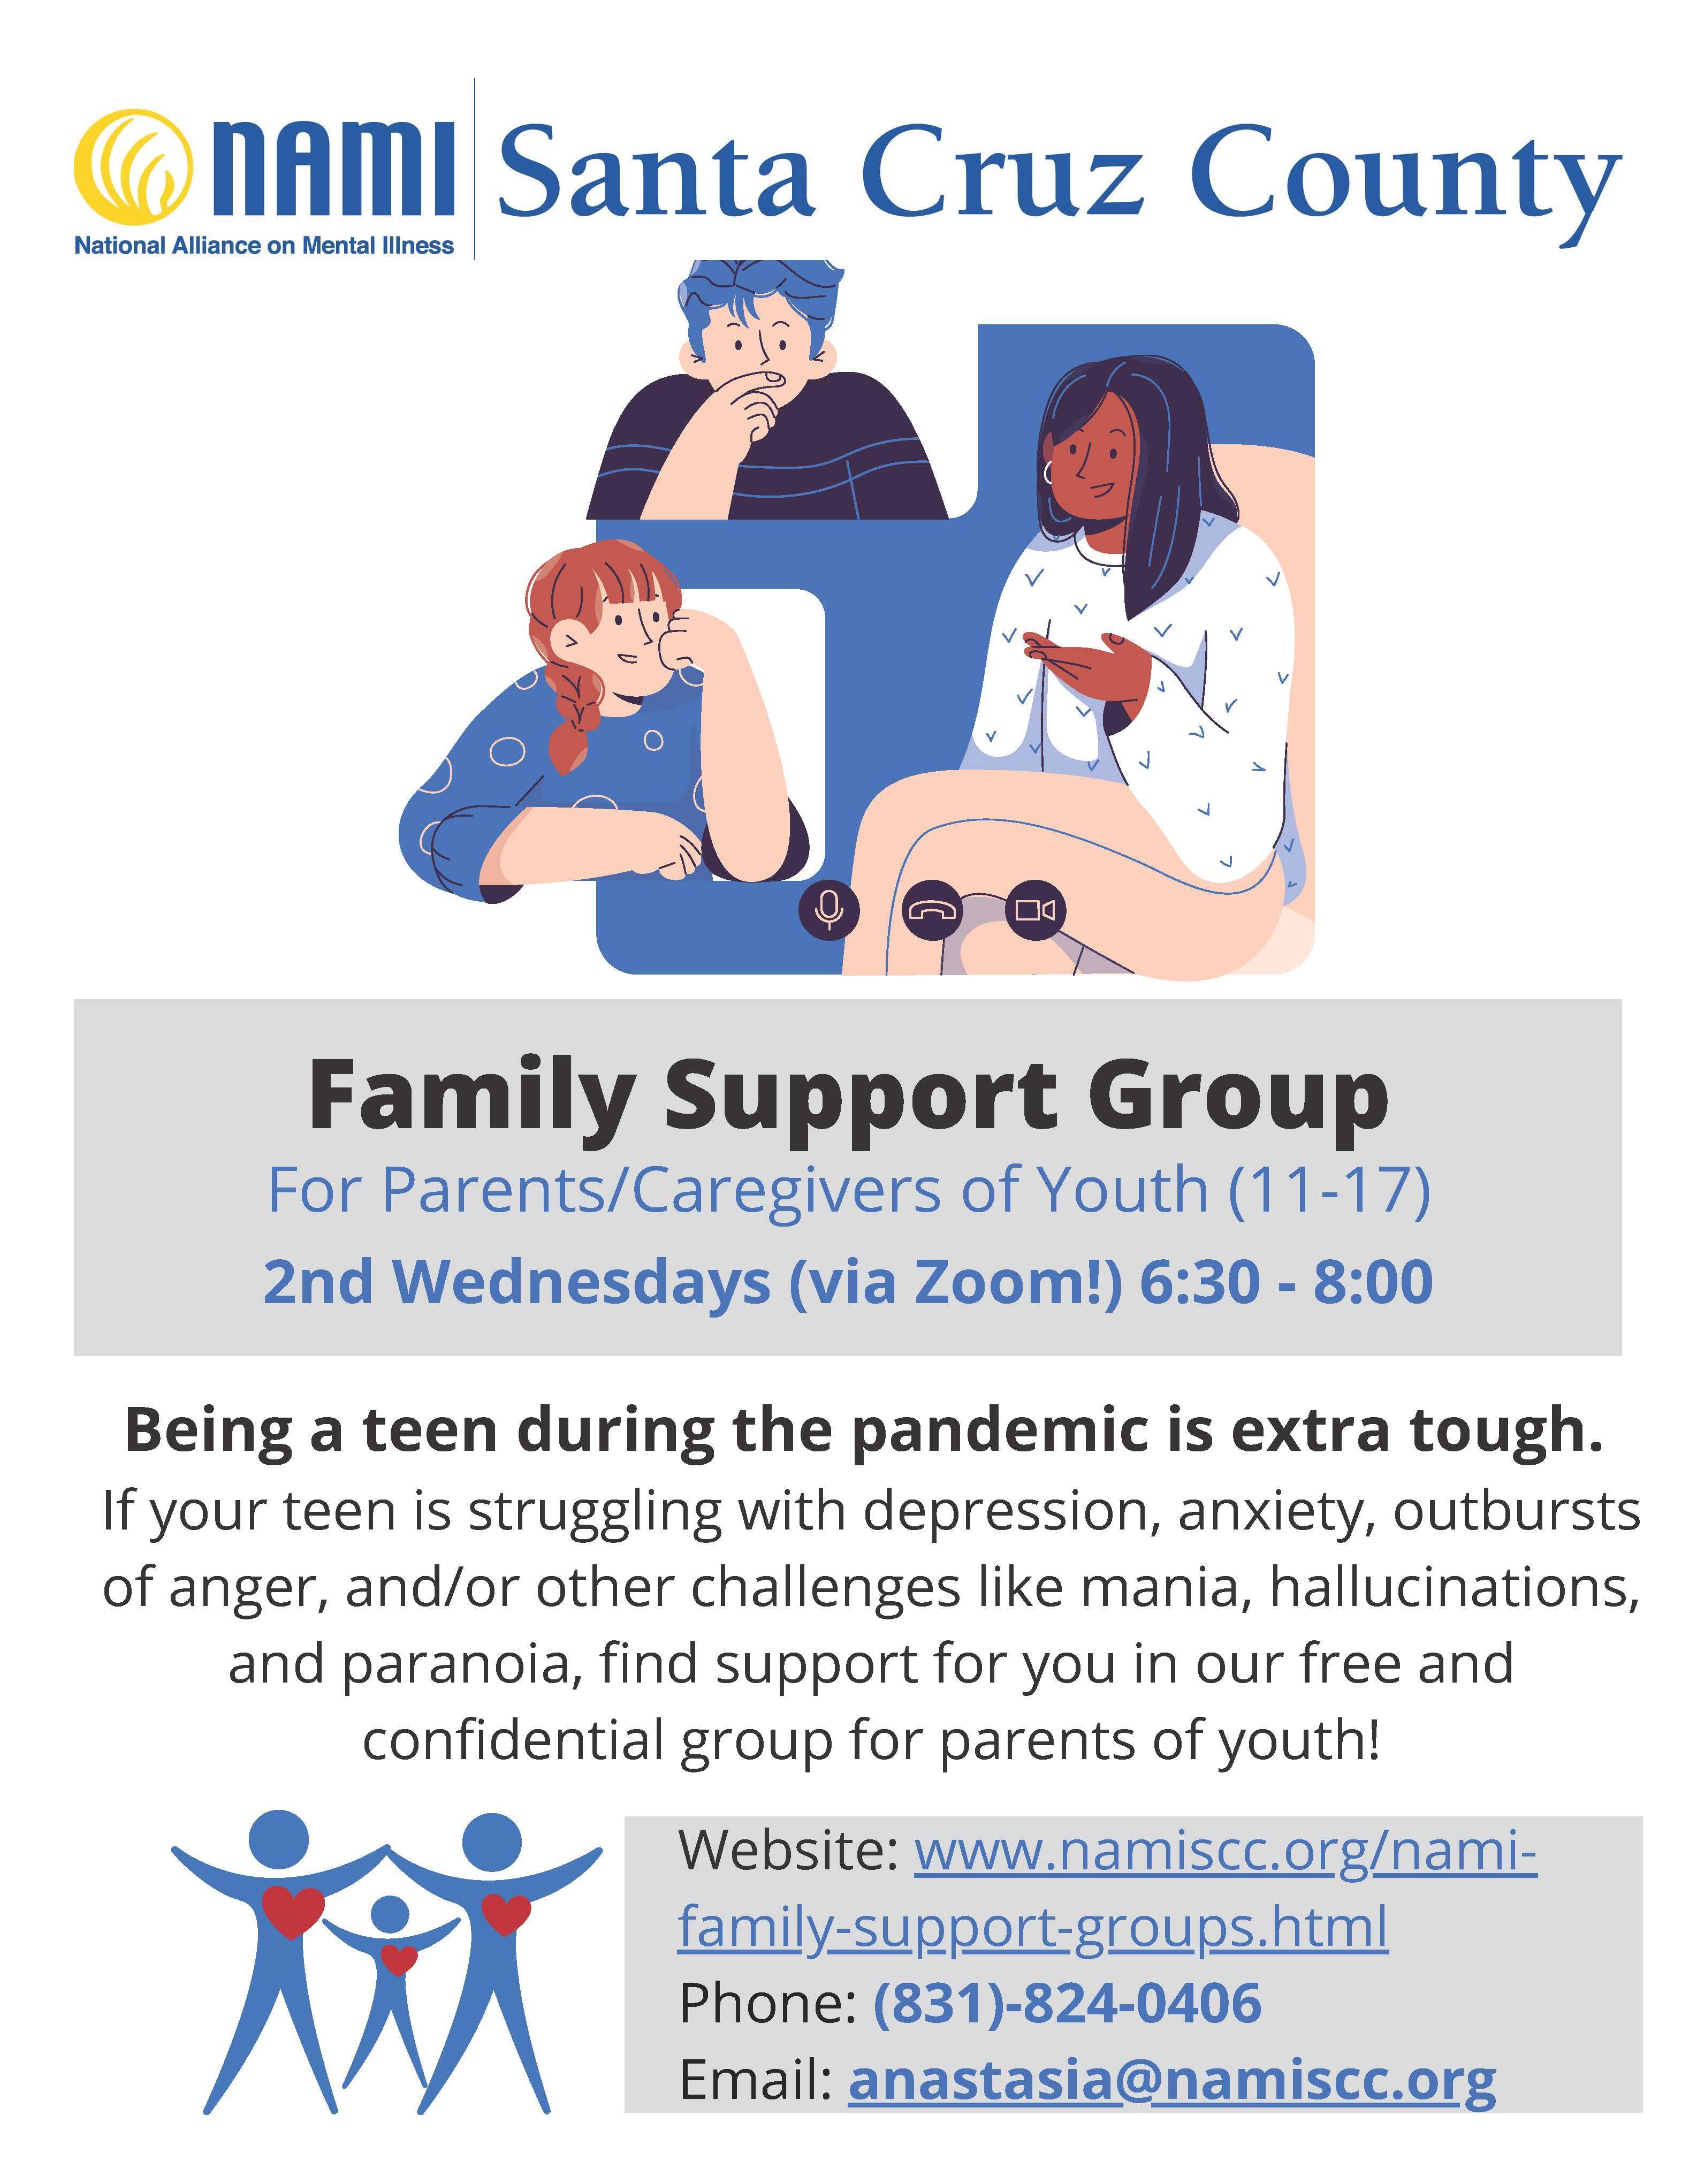 Family Support Group; Phone: (831)824-0406